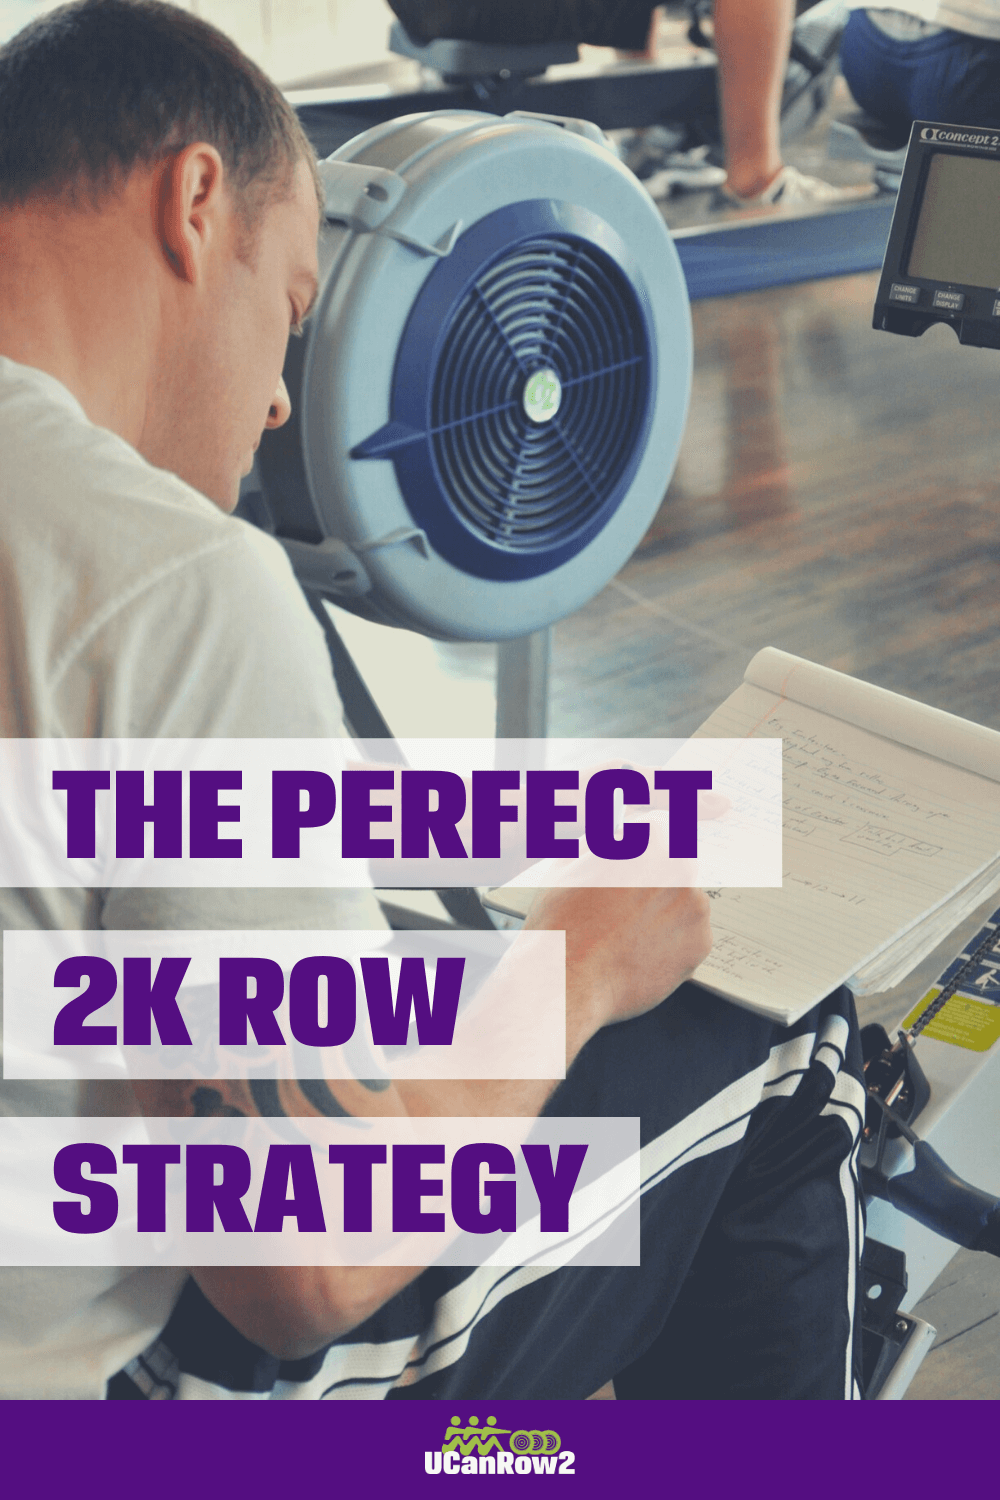 The Perfect 2k Row Strategy